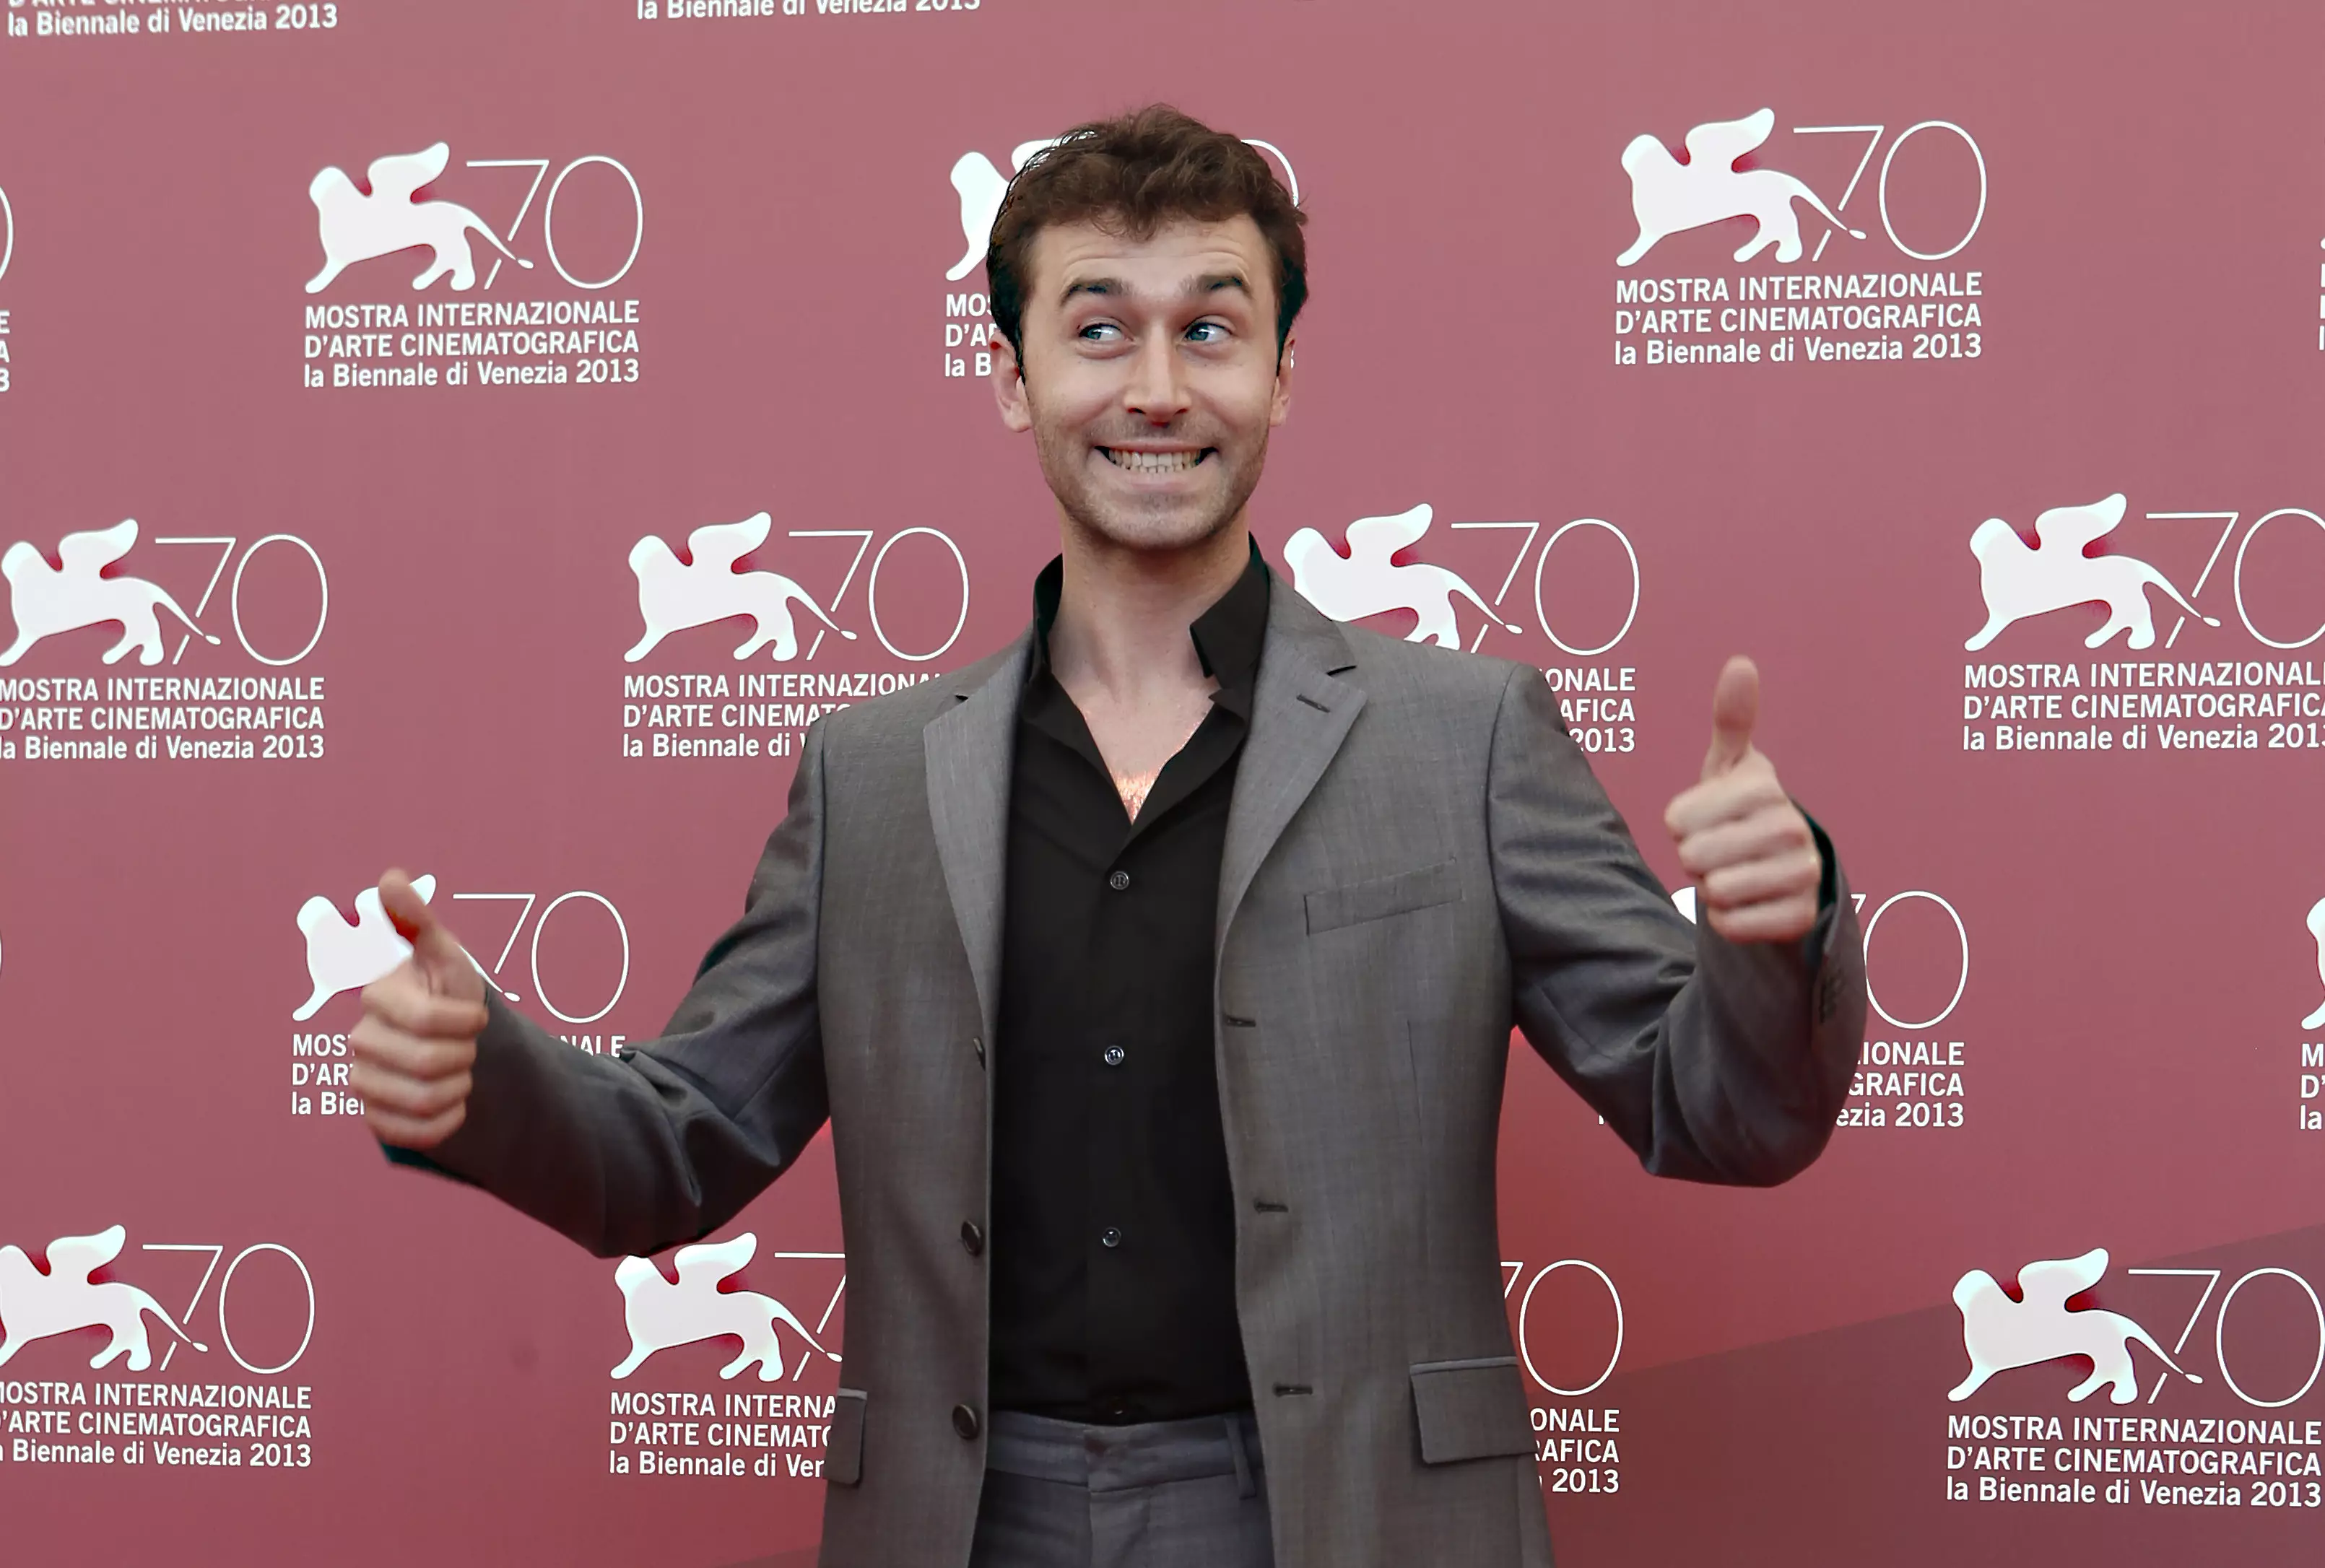 Porn Star James Deen Faces $78,000 Fine For Neglecting To Follow The Most Obvious Porn Standard